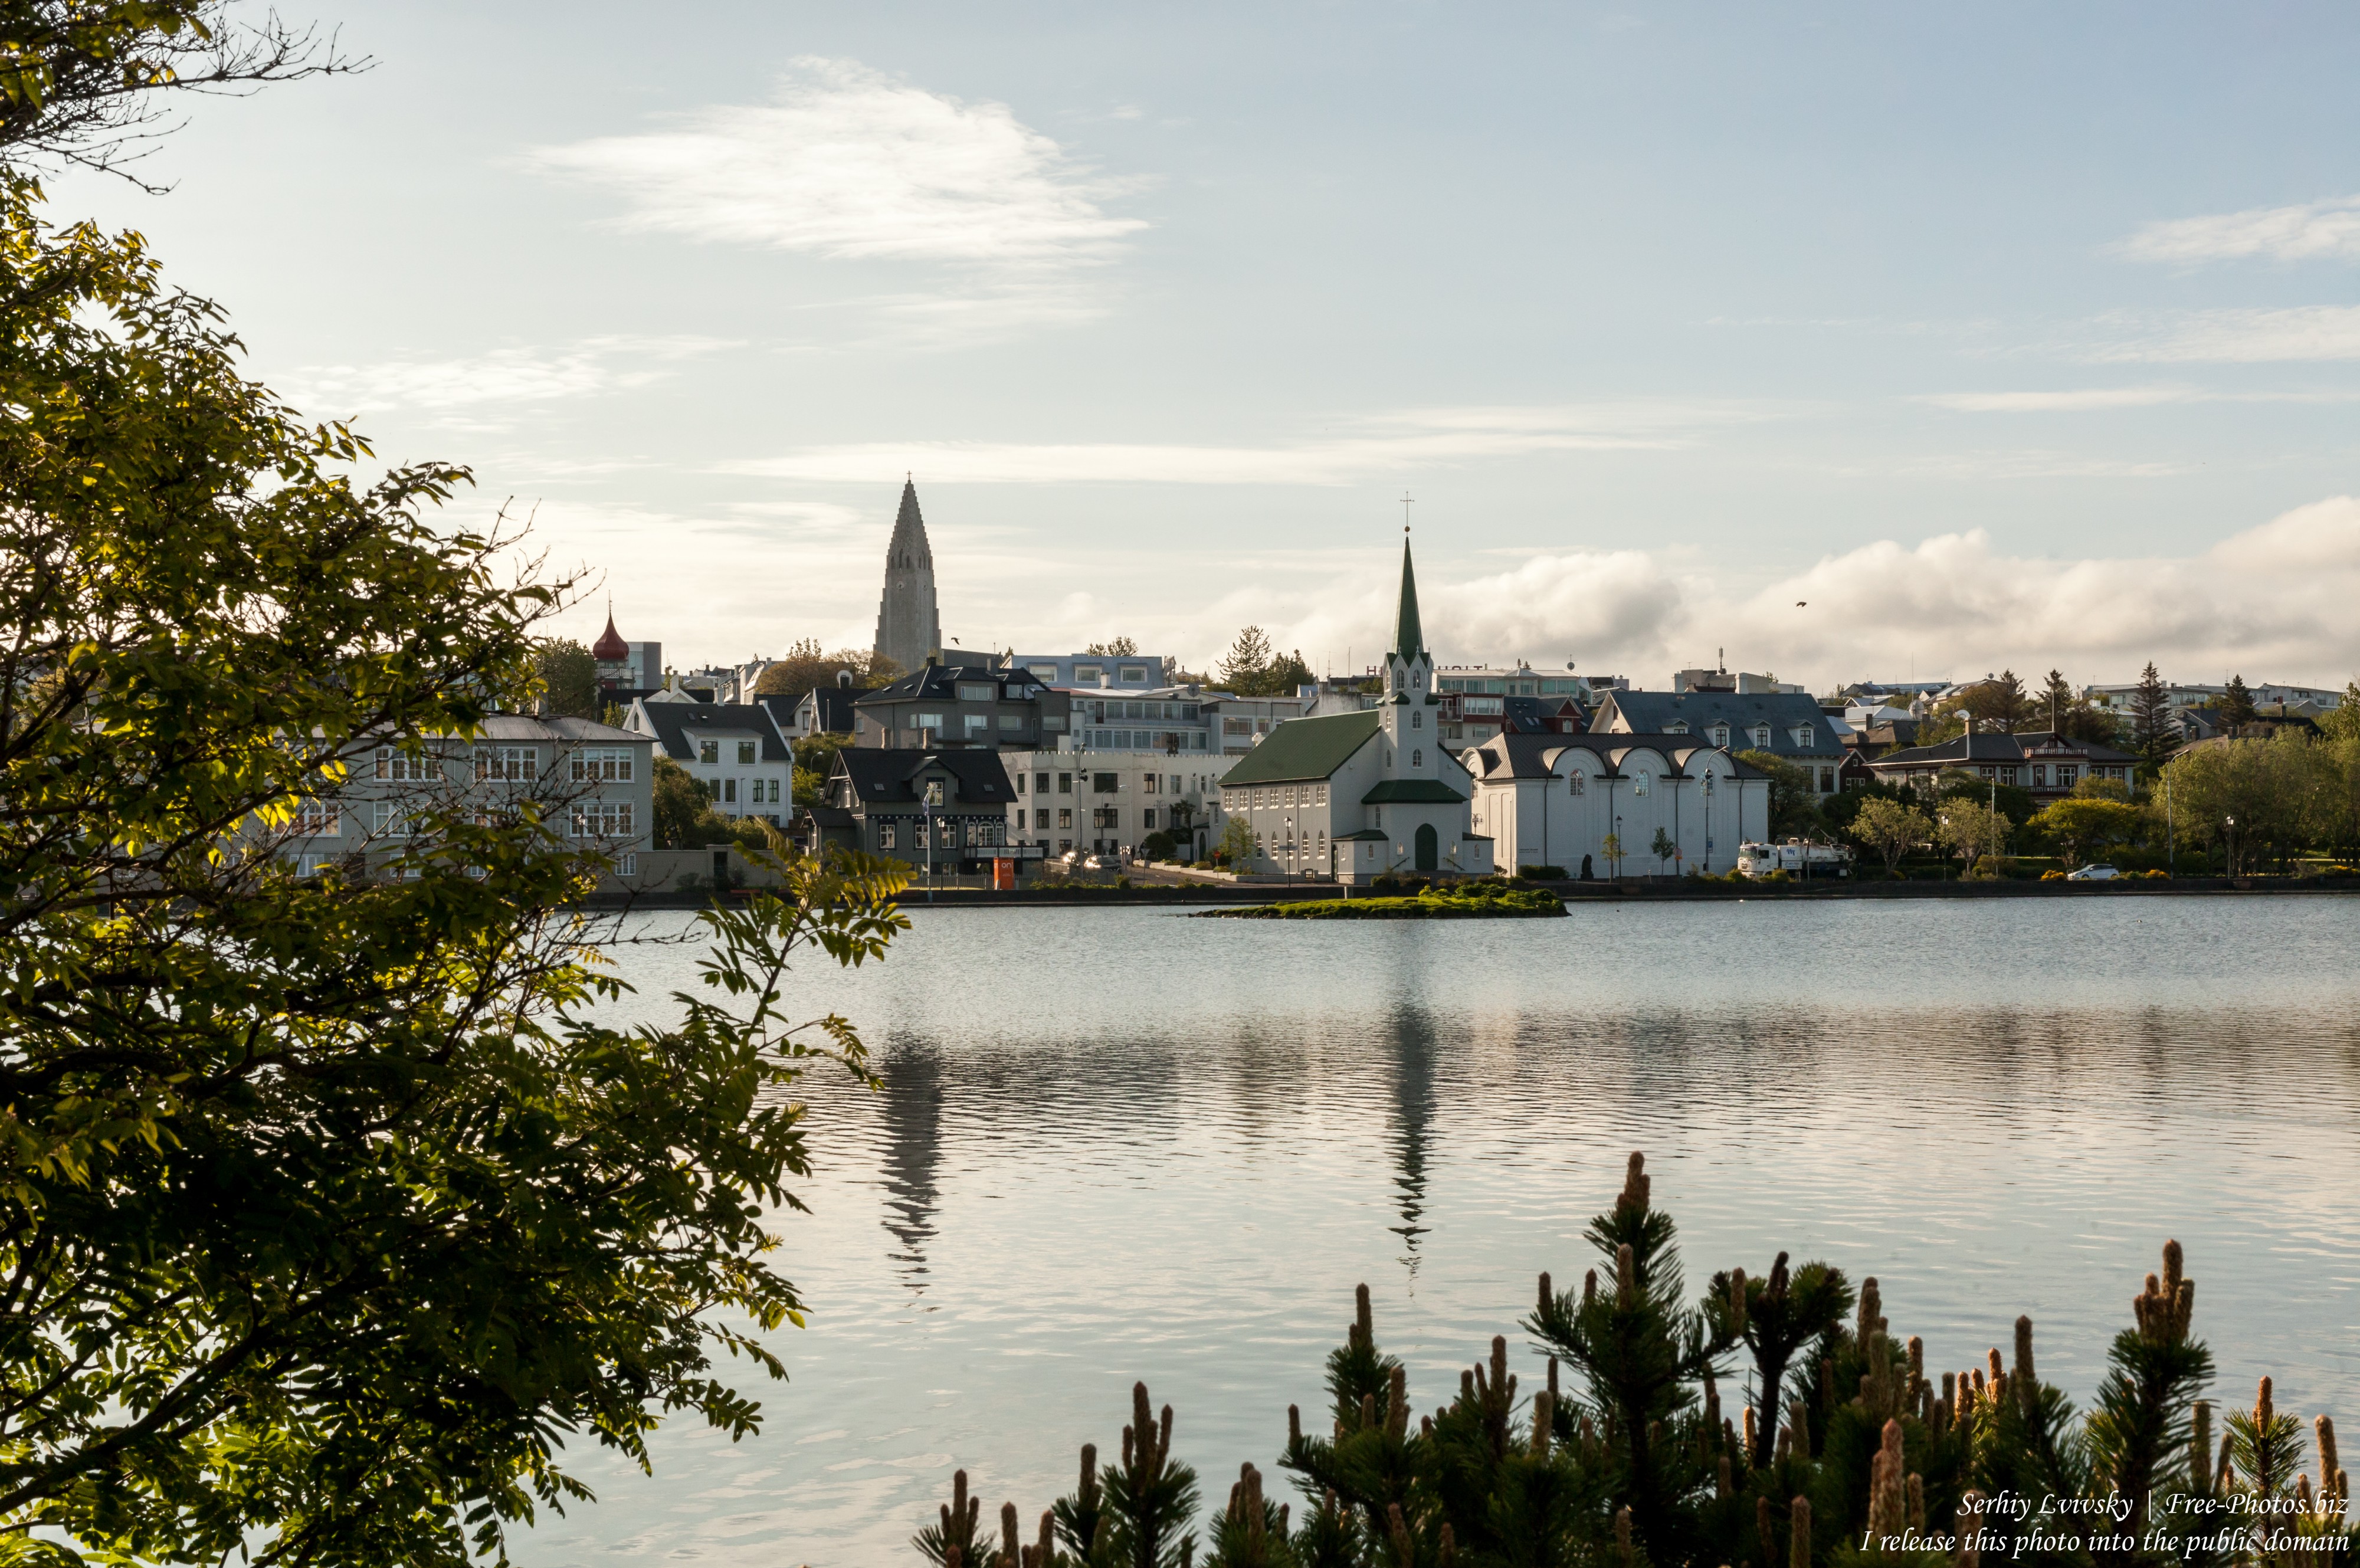 Reykjavik, Iceland, photographed in May 2019 by Serhiy Lvivsky, picture 71